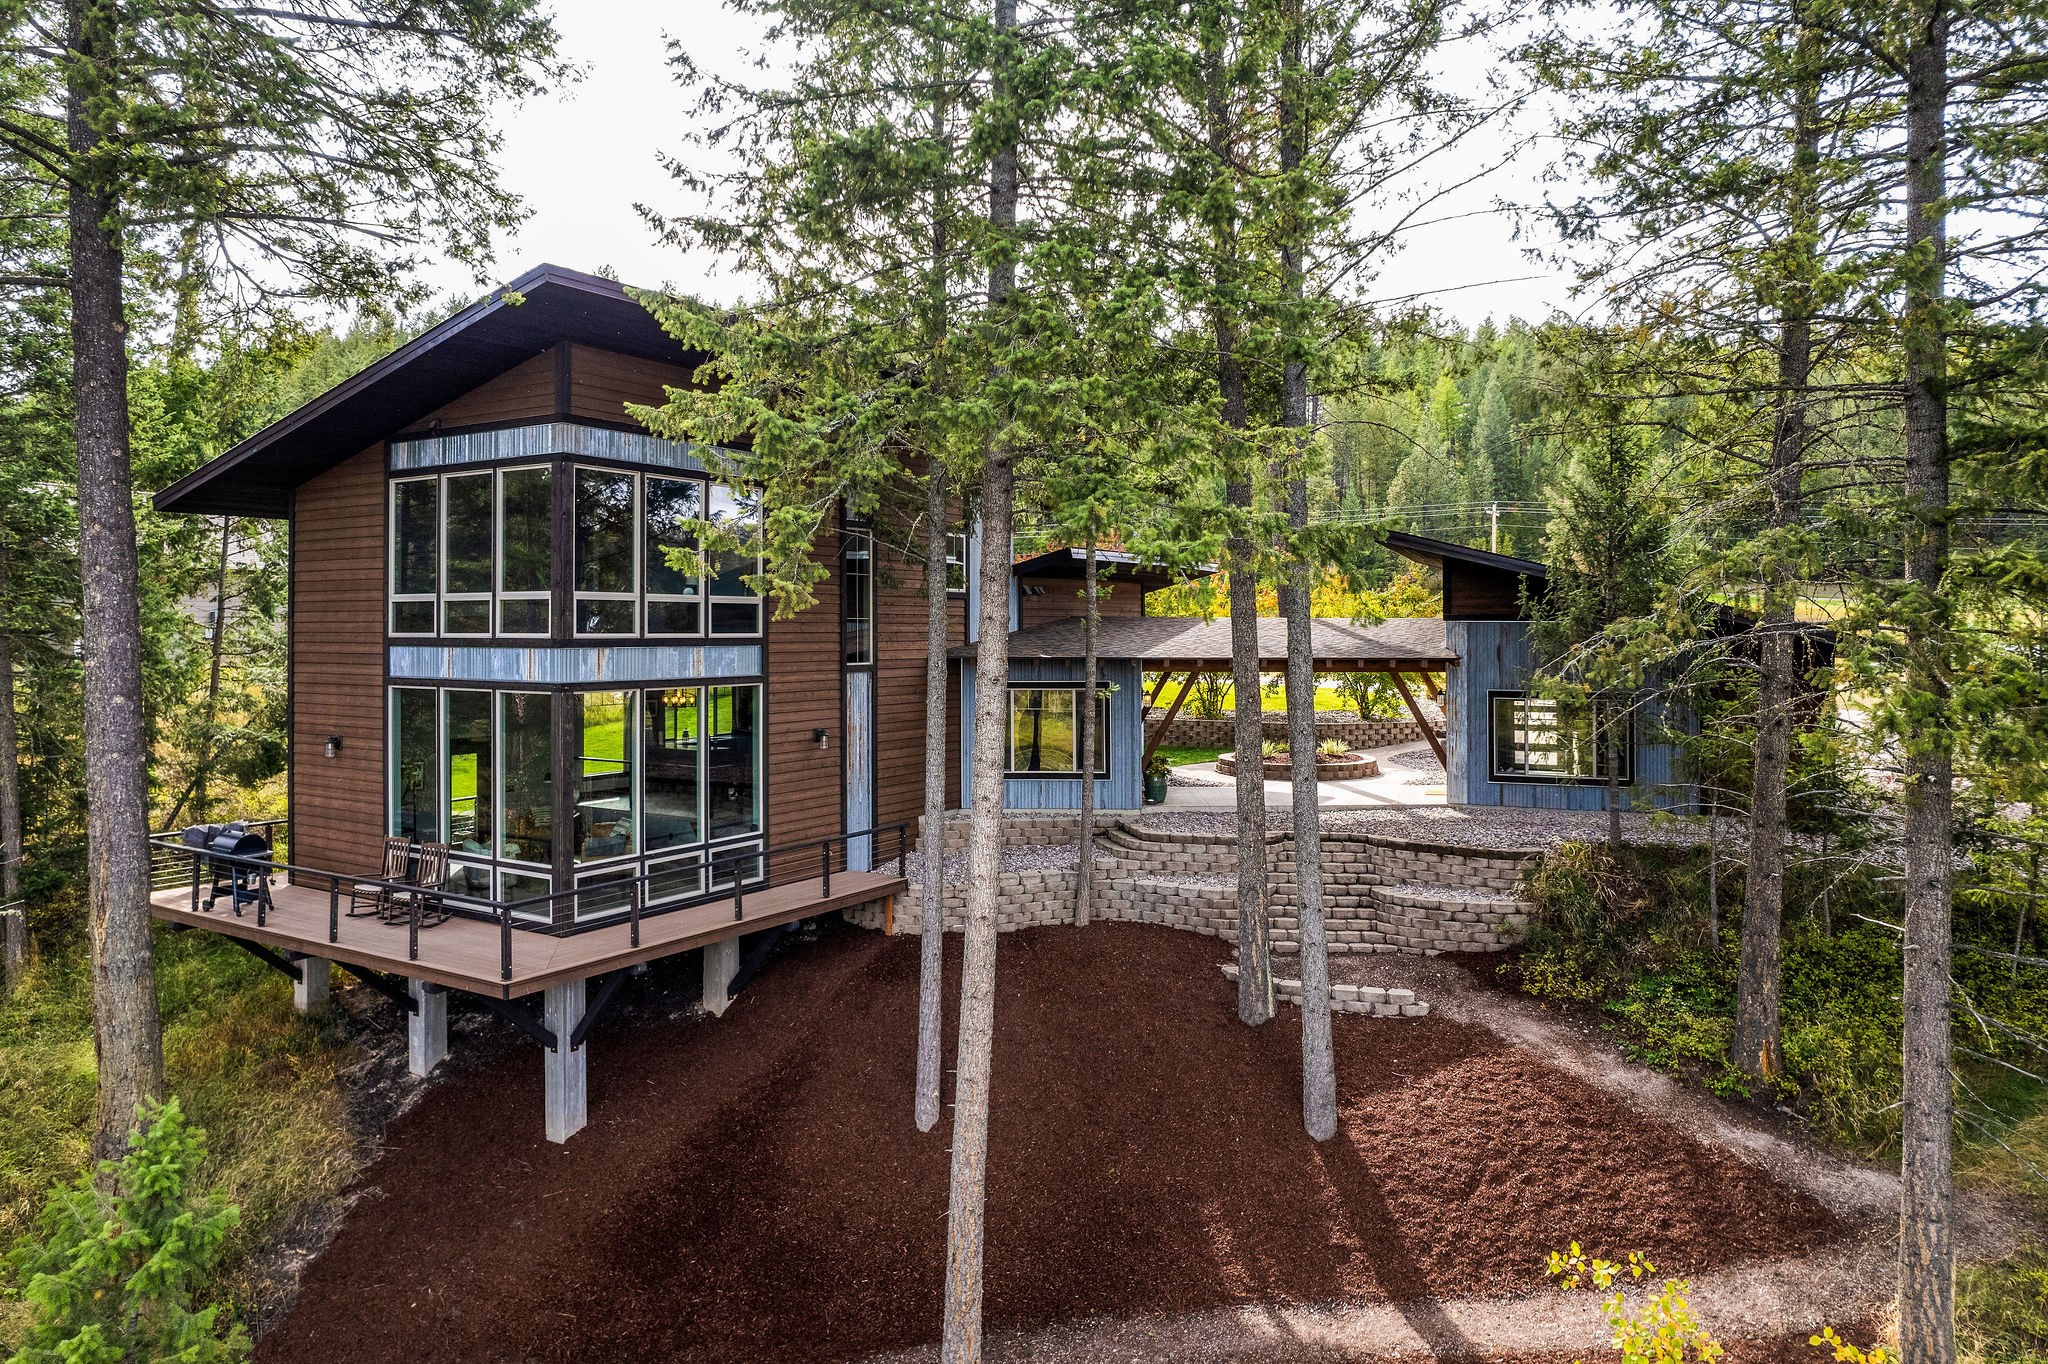 Just Minutes from downtown Bigfork sits this stunning mountain modern home. Built in 2017, this high-end 3 bedroom, 3 bathroom house  features an oversized detached garage with a covered breezeway.   As you step inside, an abundance of natural light filters through floor-to-ceiling windows with breathtaking Swan Mountain views.   An open floor plan welcomes you into the gourmet kitchen with large walk-in pantry.  The master bedroom view will leave you speechless, complete with in-suite bath and walk-in closet.  The comfortable living area walks out to a wrap around deck with a Montana dream back yard.   A walkway to your private dock and shared pond is an outdoorsman and bird watchers' paradise.  Hand laid herringbone tile flooring and many other custom features. 
Contact Tim Killen at 406-897-4289, or your real estate professional.